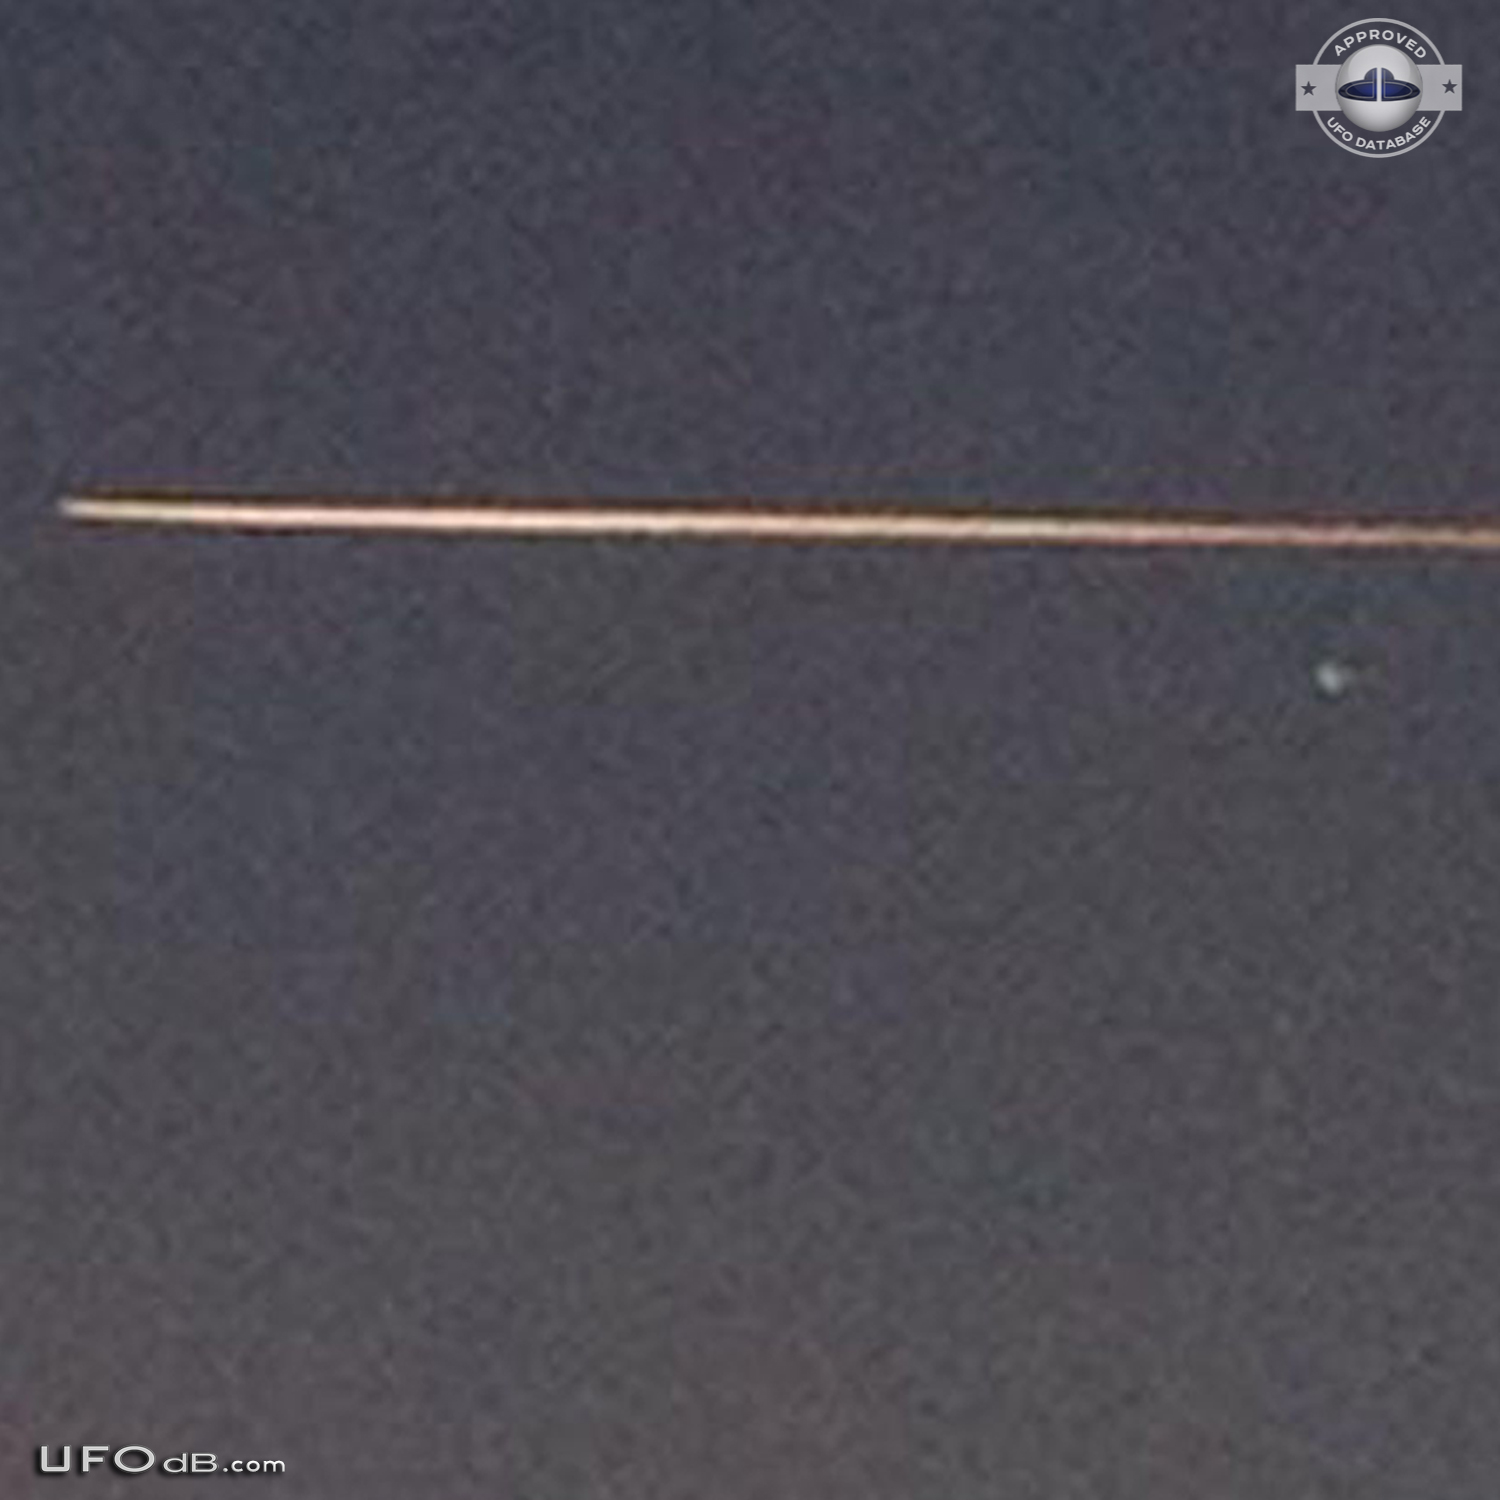 Photos of vaportrail in sunrise get UFO near plane in Evant Texas 2012 UFO Picture #519-3